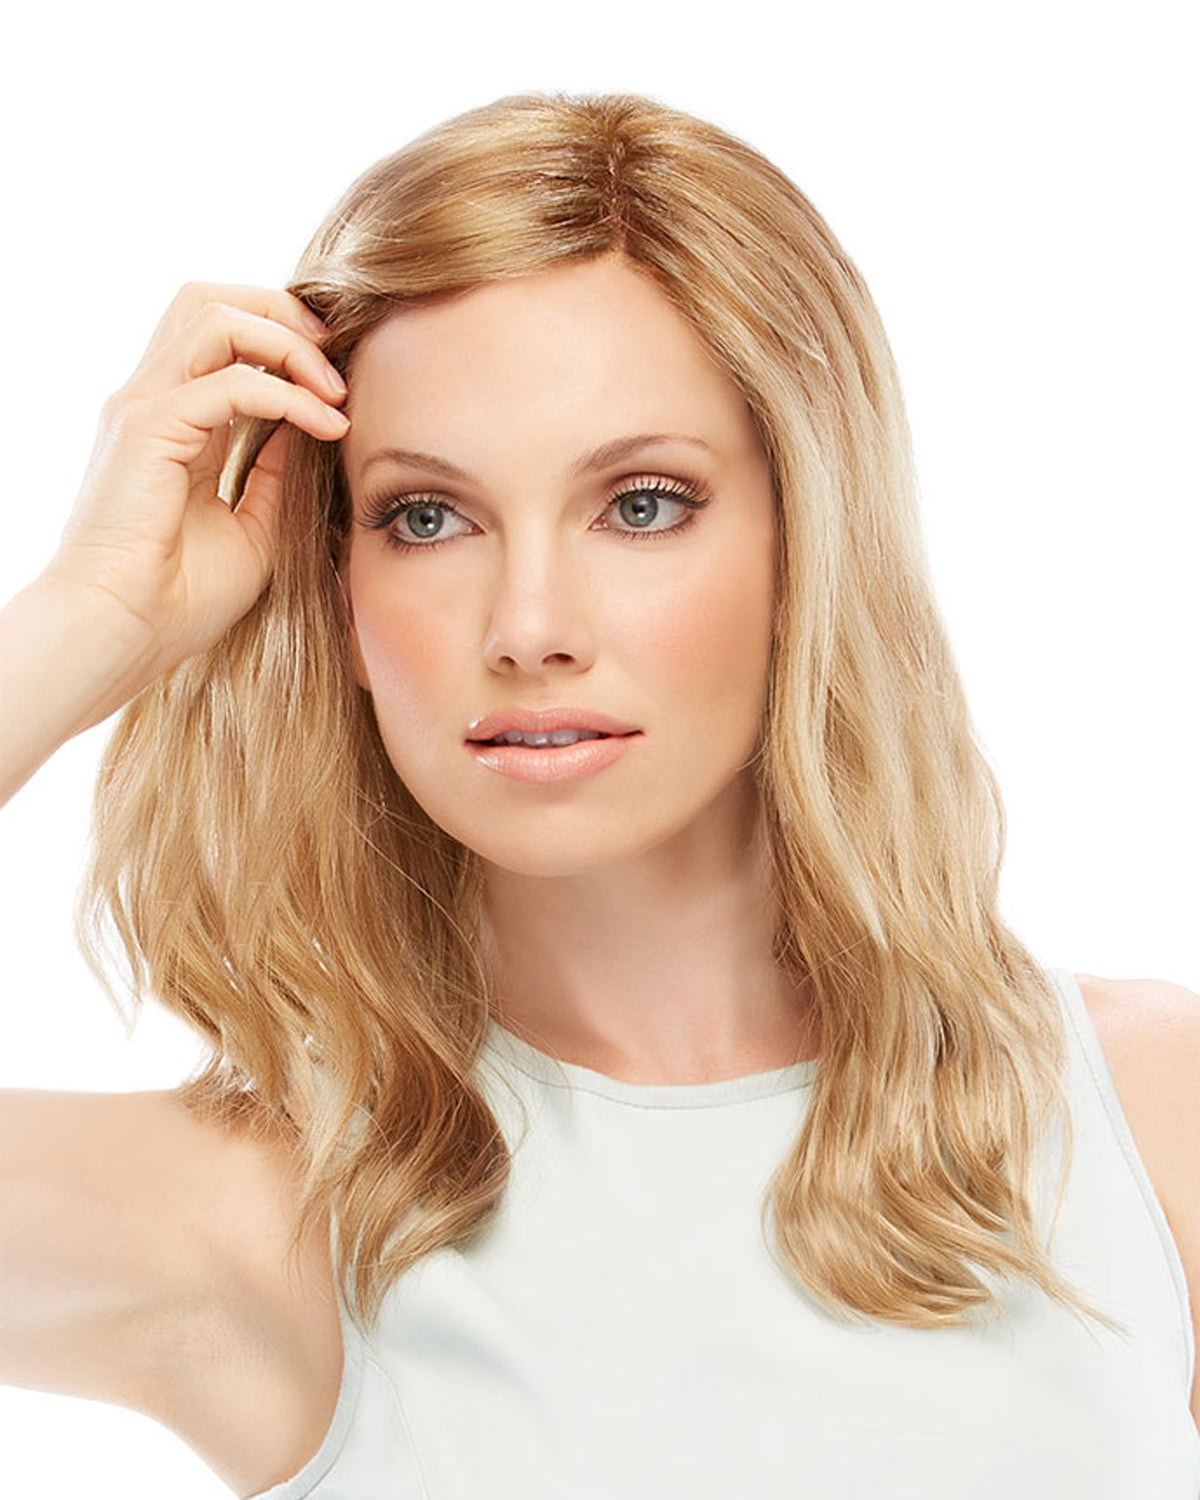 Heidi (Exclusive) | Lace Front & Monofilament Synthetic Wig by Jon Renau